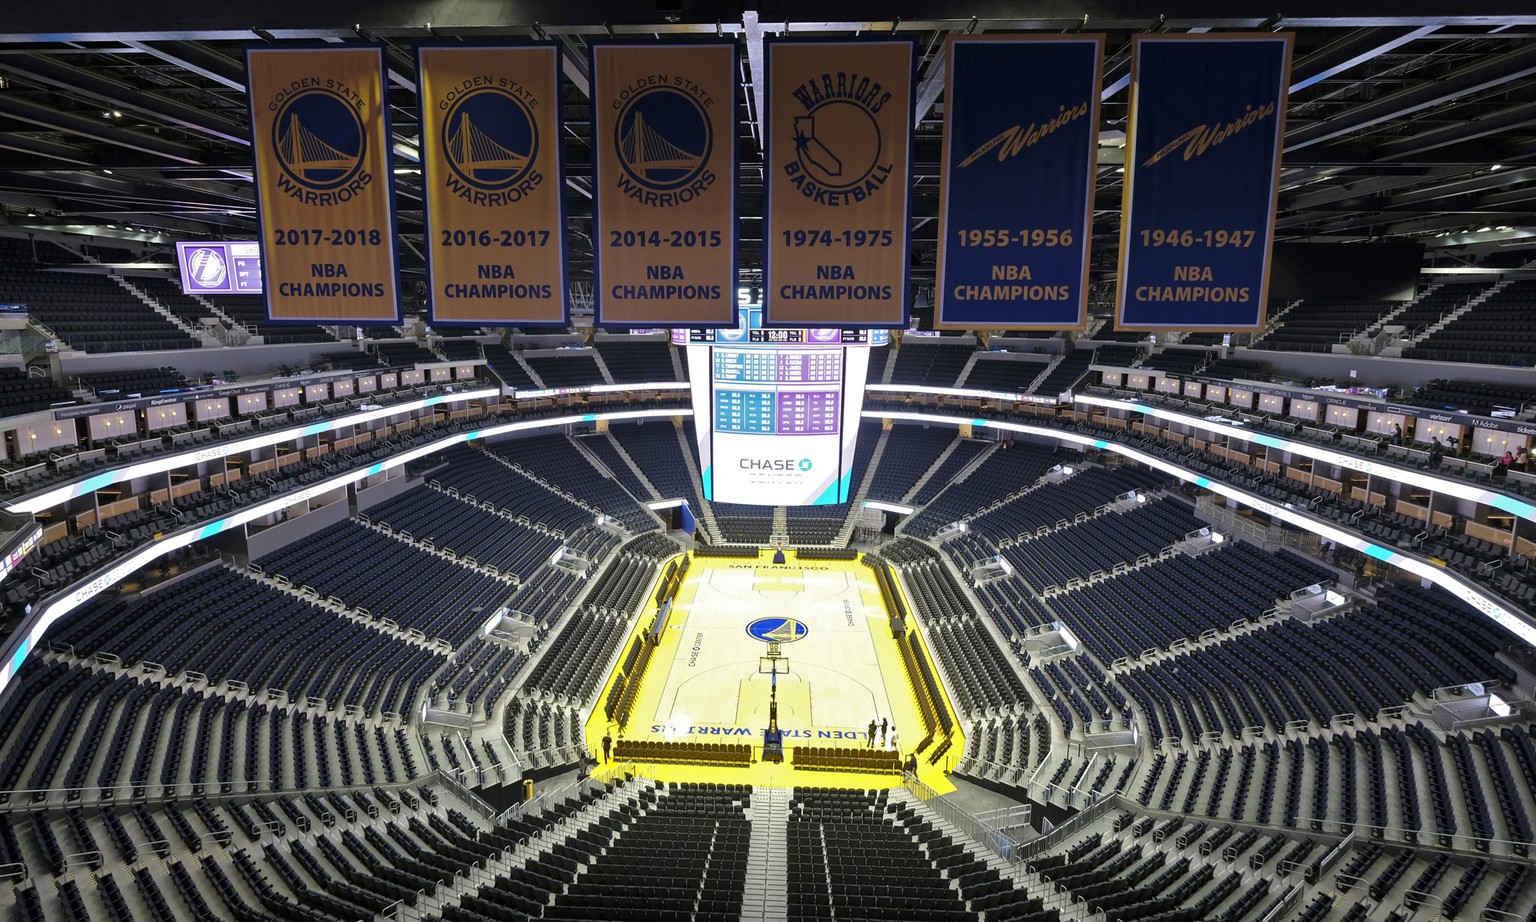 FILE - In this Aug. 26, 2019, file photo, the Golden State Warriors championship banners hang above the seating and basketball court at the Chase Center in San Francisco. Stephen Curry knows how diffe ...